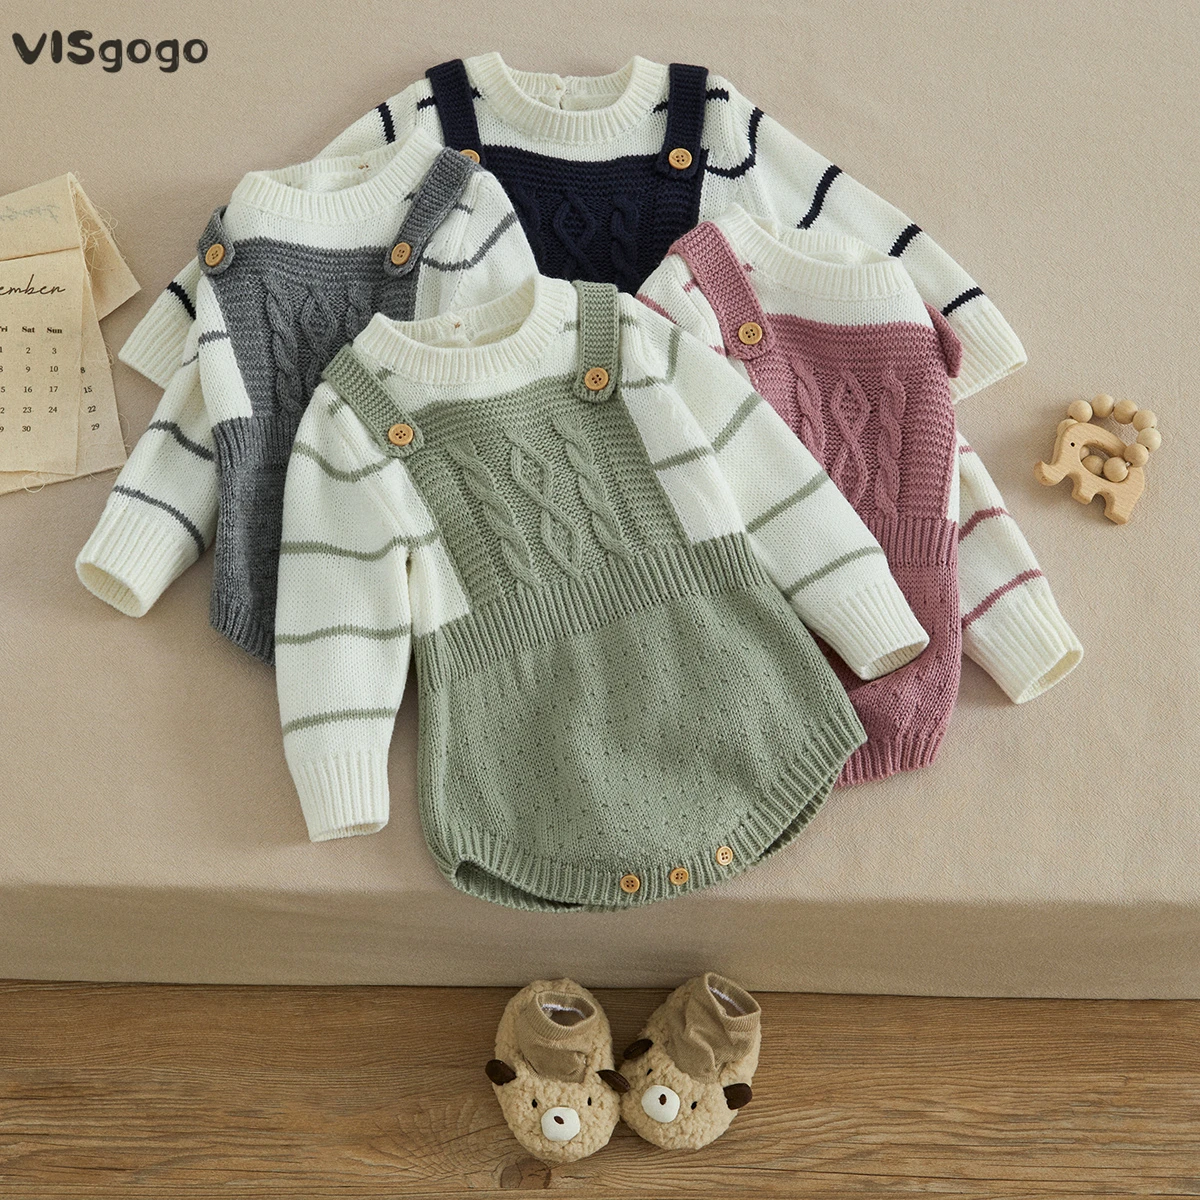 VISgogo Toddler Baby Knit Sweater Rompers Striped Casual Fake Two Piece Warm Long Sleeve Jumpsuit for Newborn Girl Boy